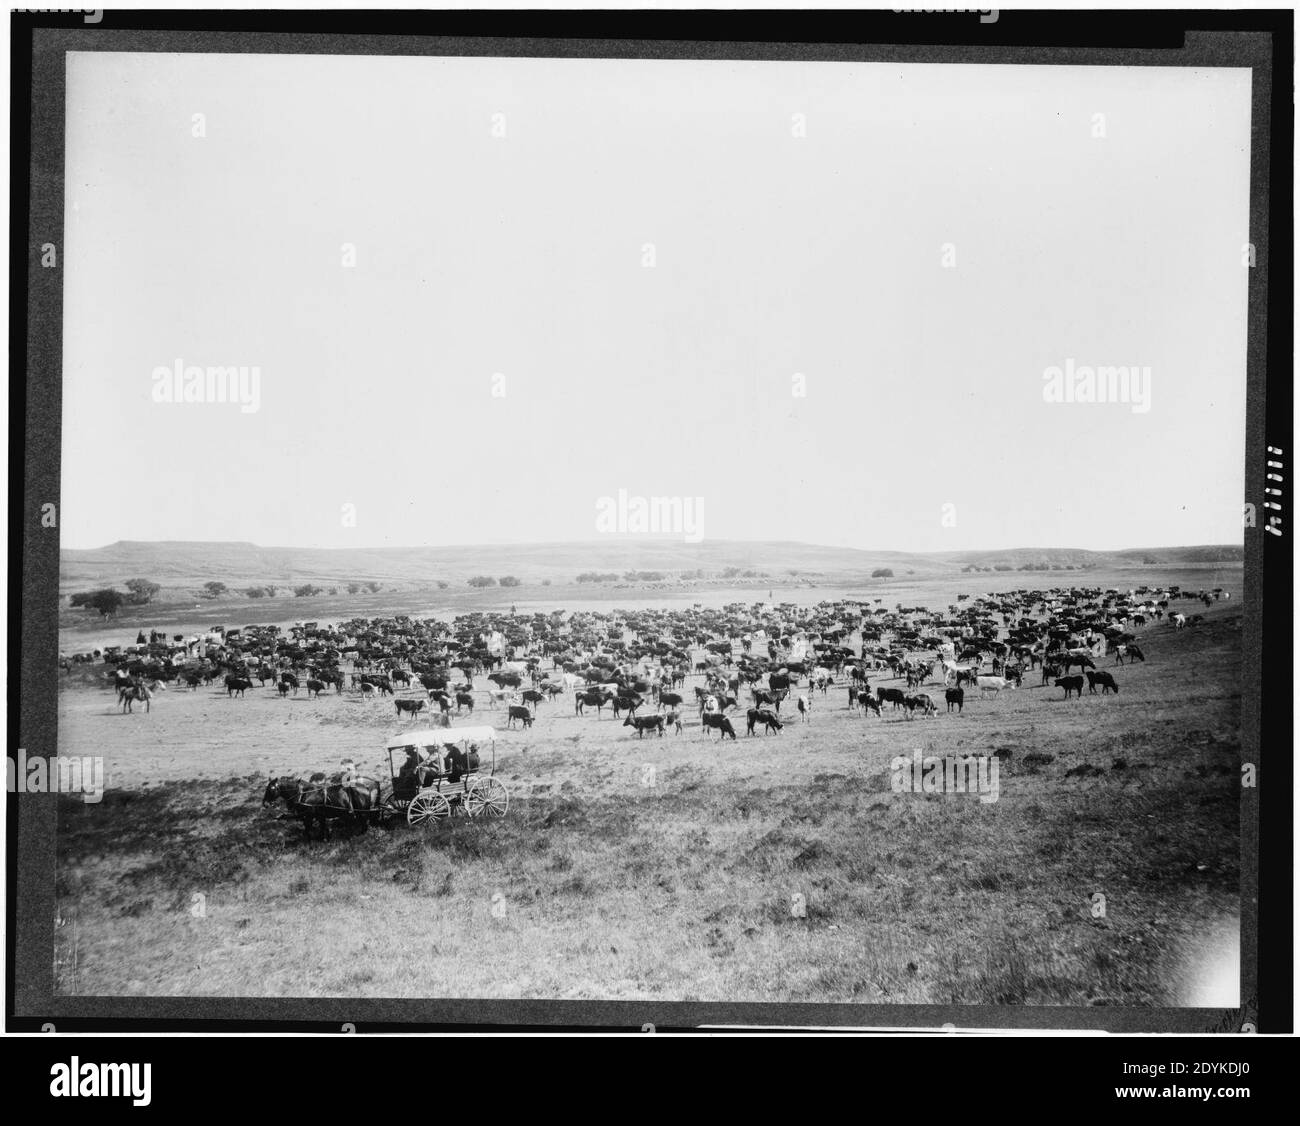 Large herd of cattle on a western range, probably in Colorado or Utah, and four men on wagon in foreground) - F.M. Steele, special photographer, C.R.I. & P. Railway System Stock Photo